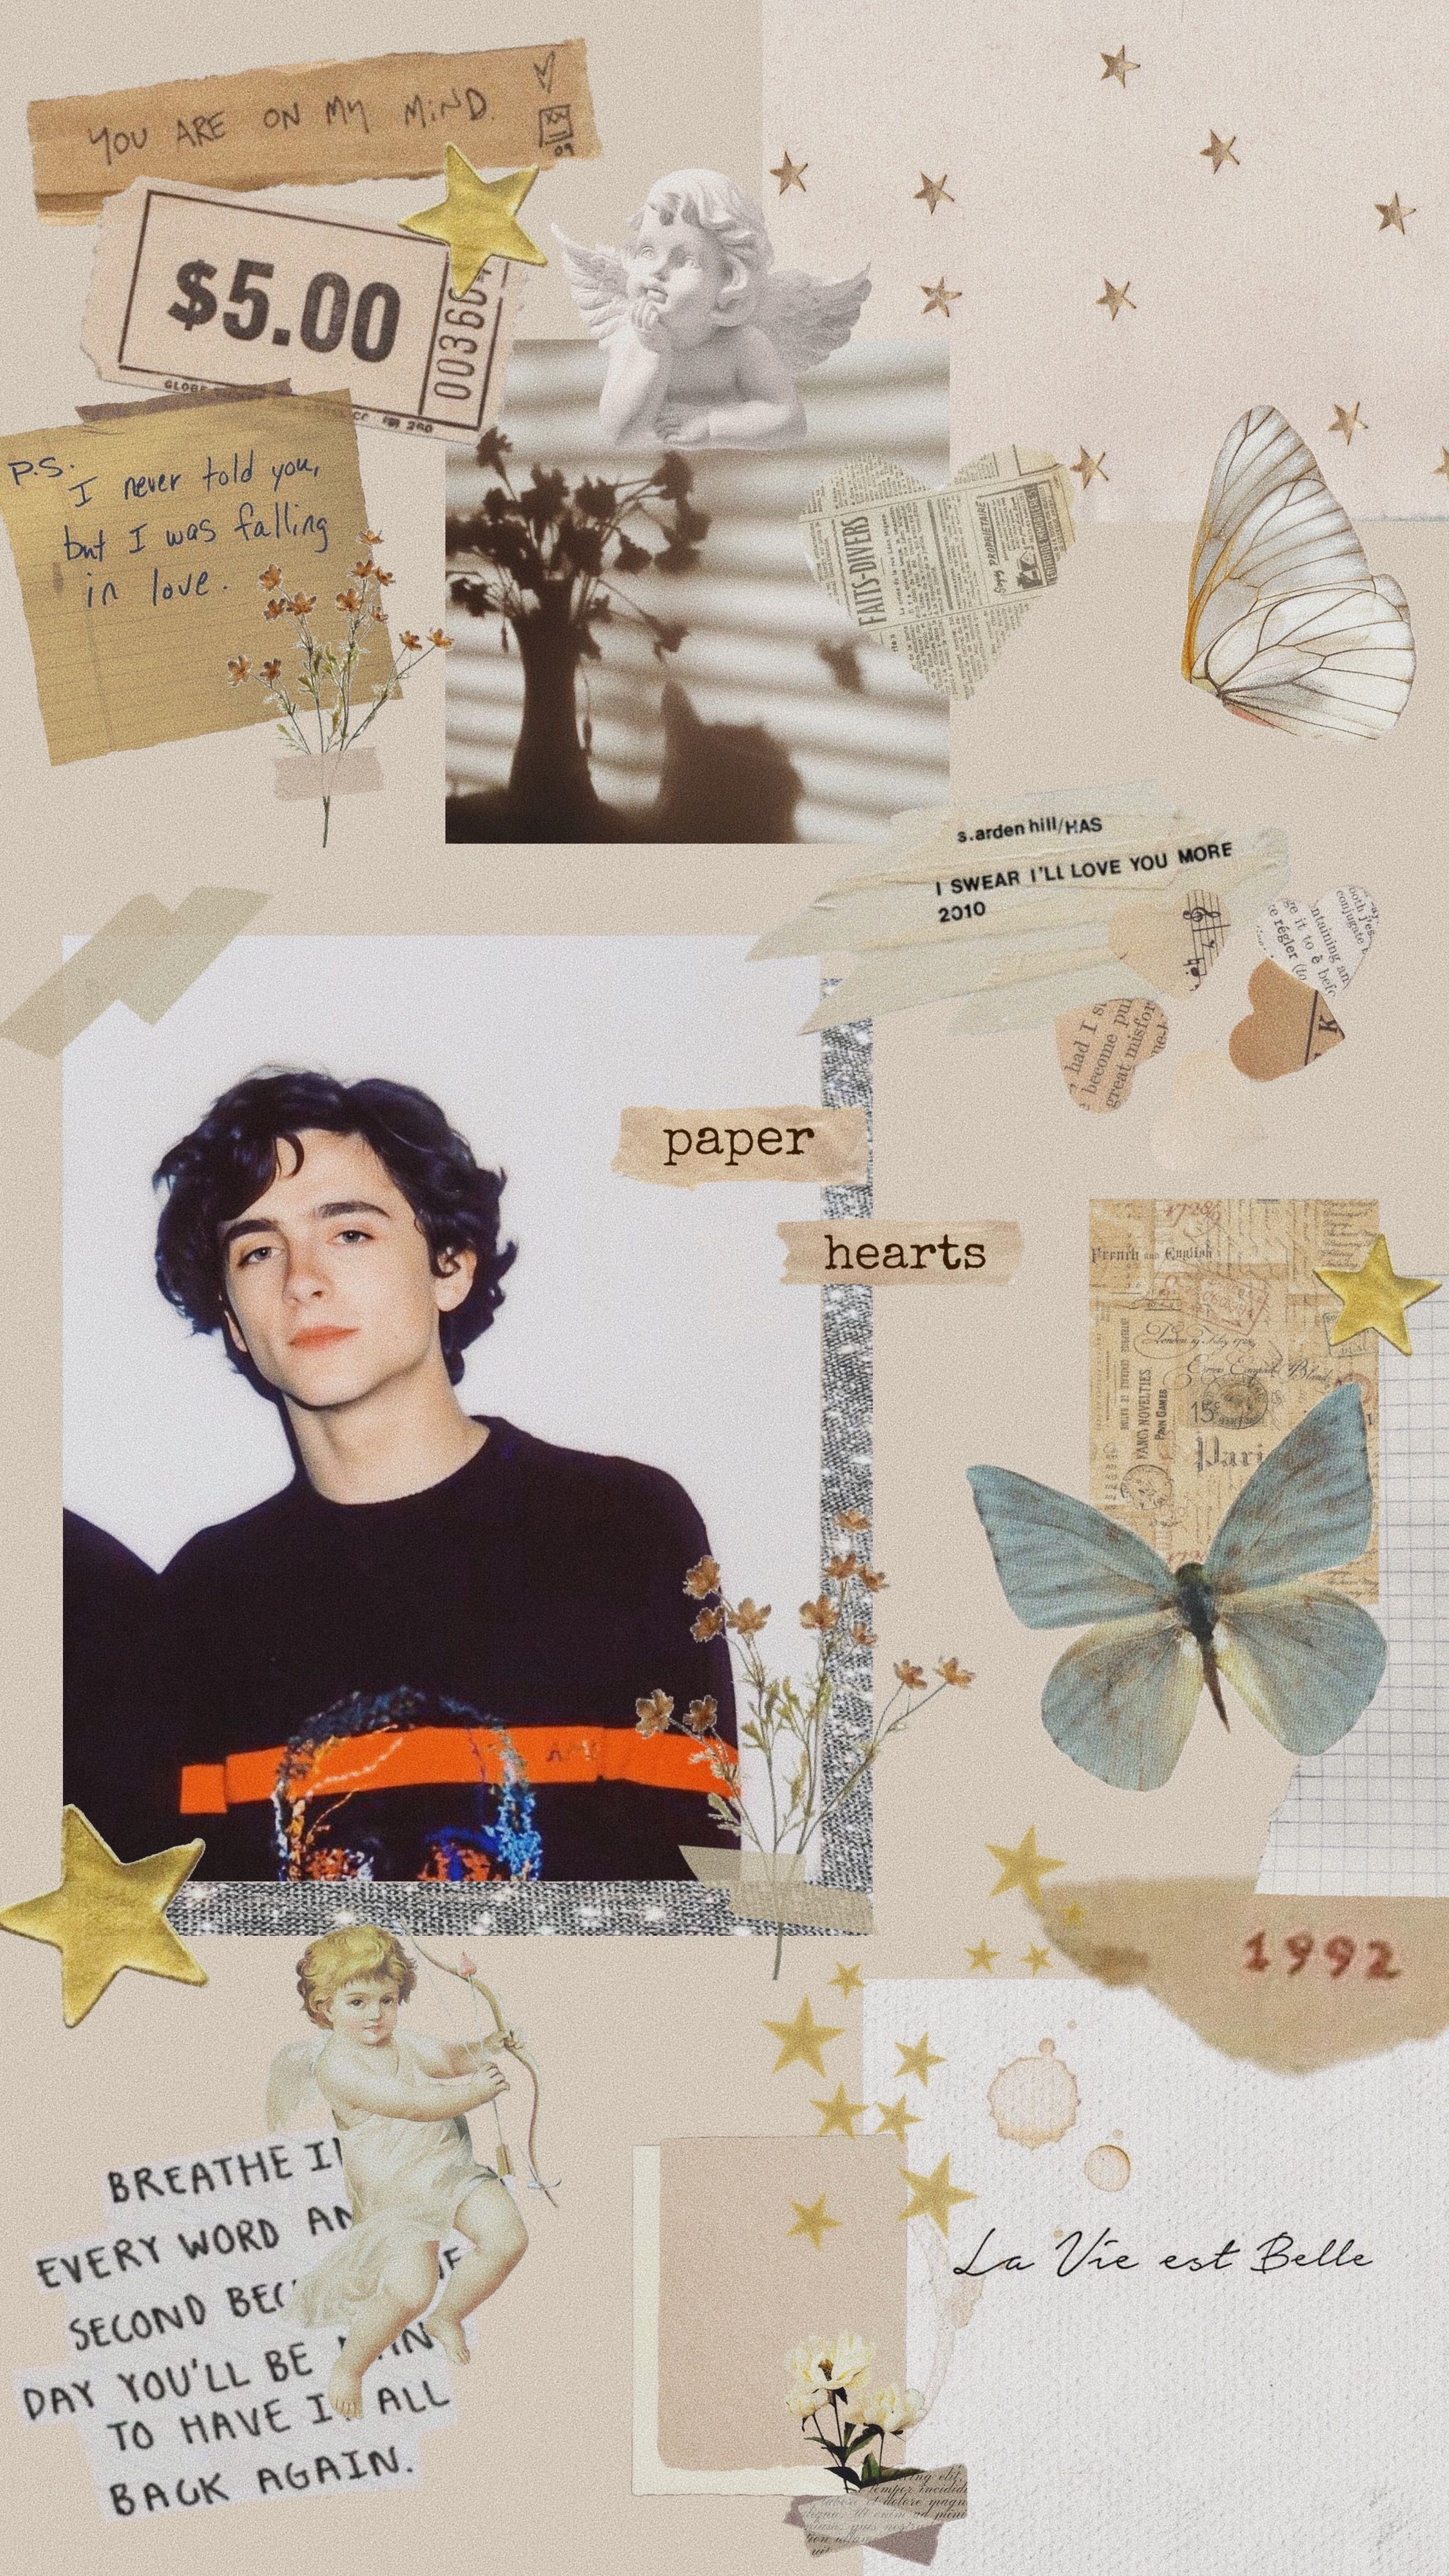 A collage of pictures and words - Timothee Chalamet